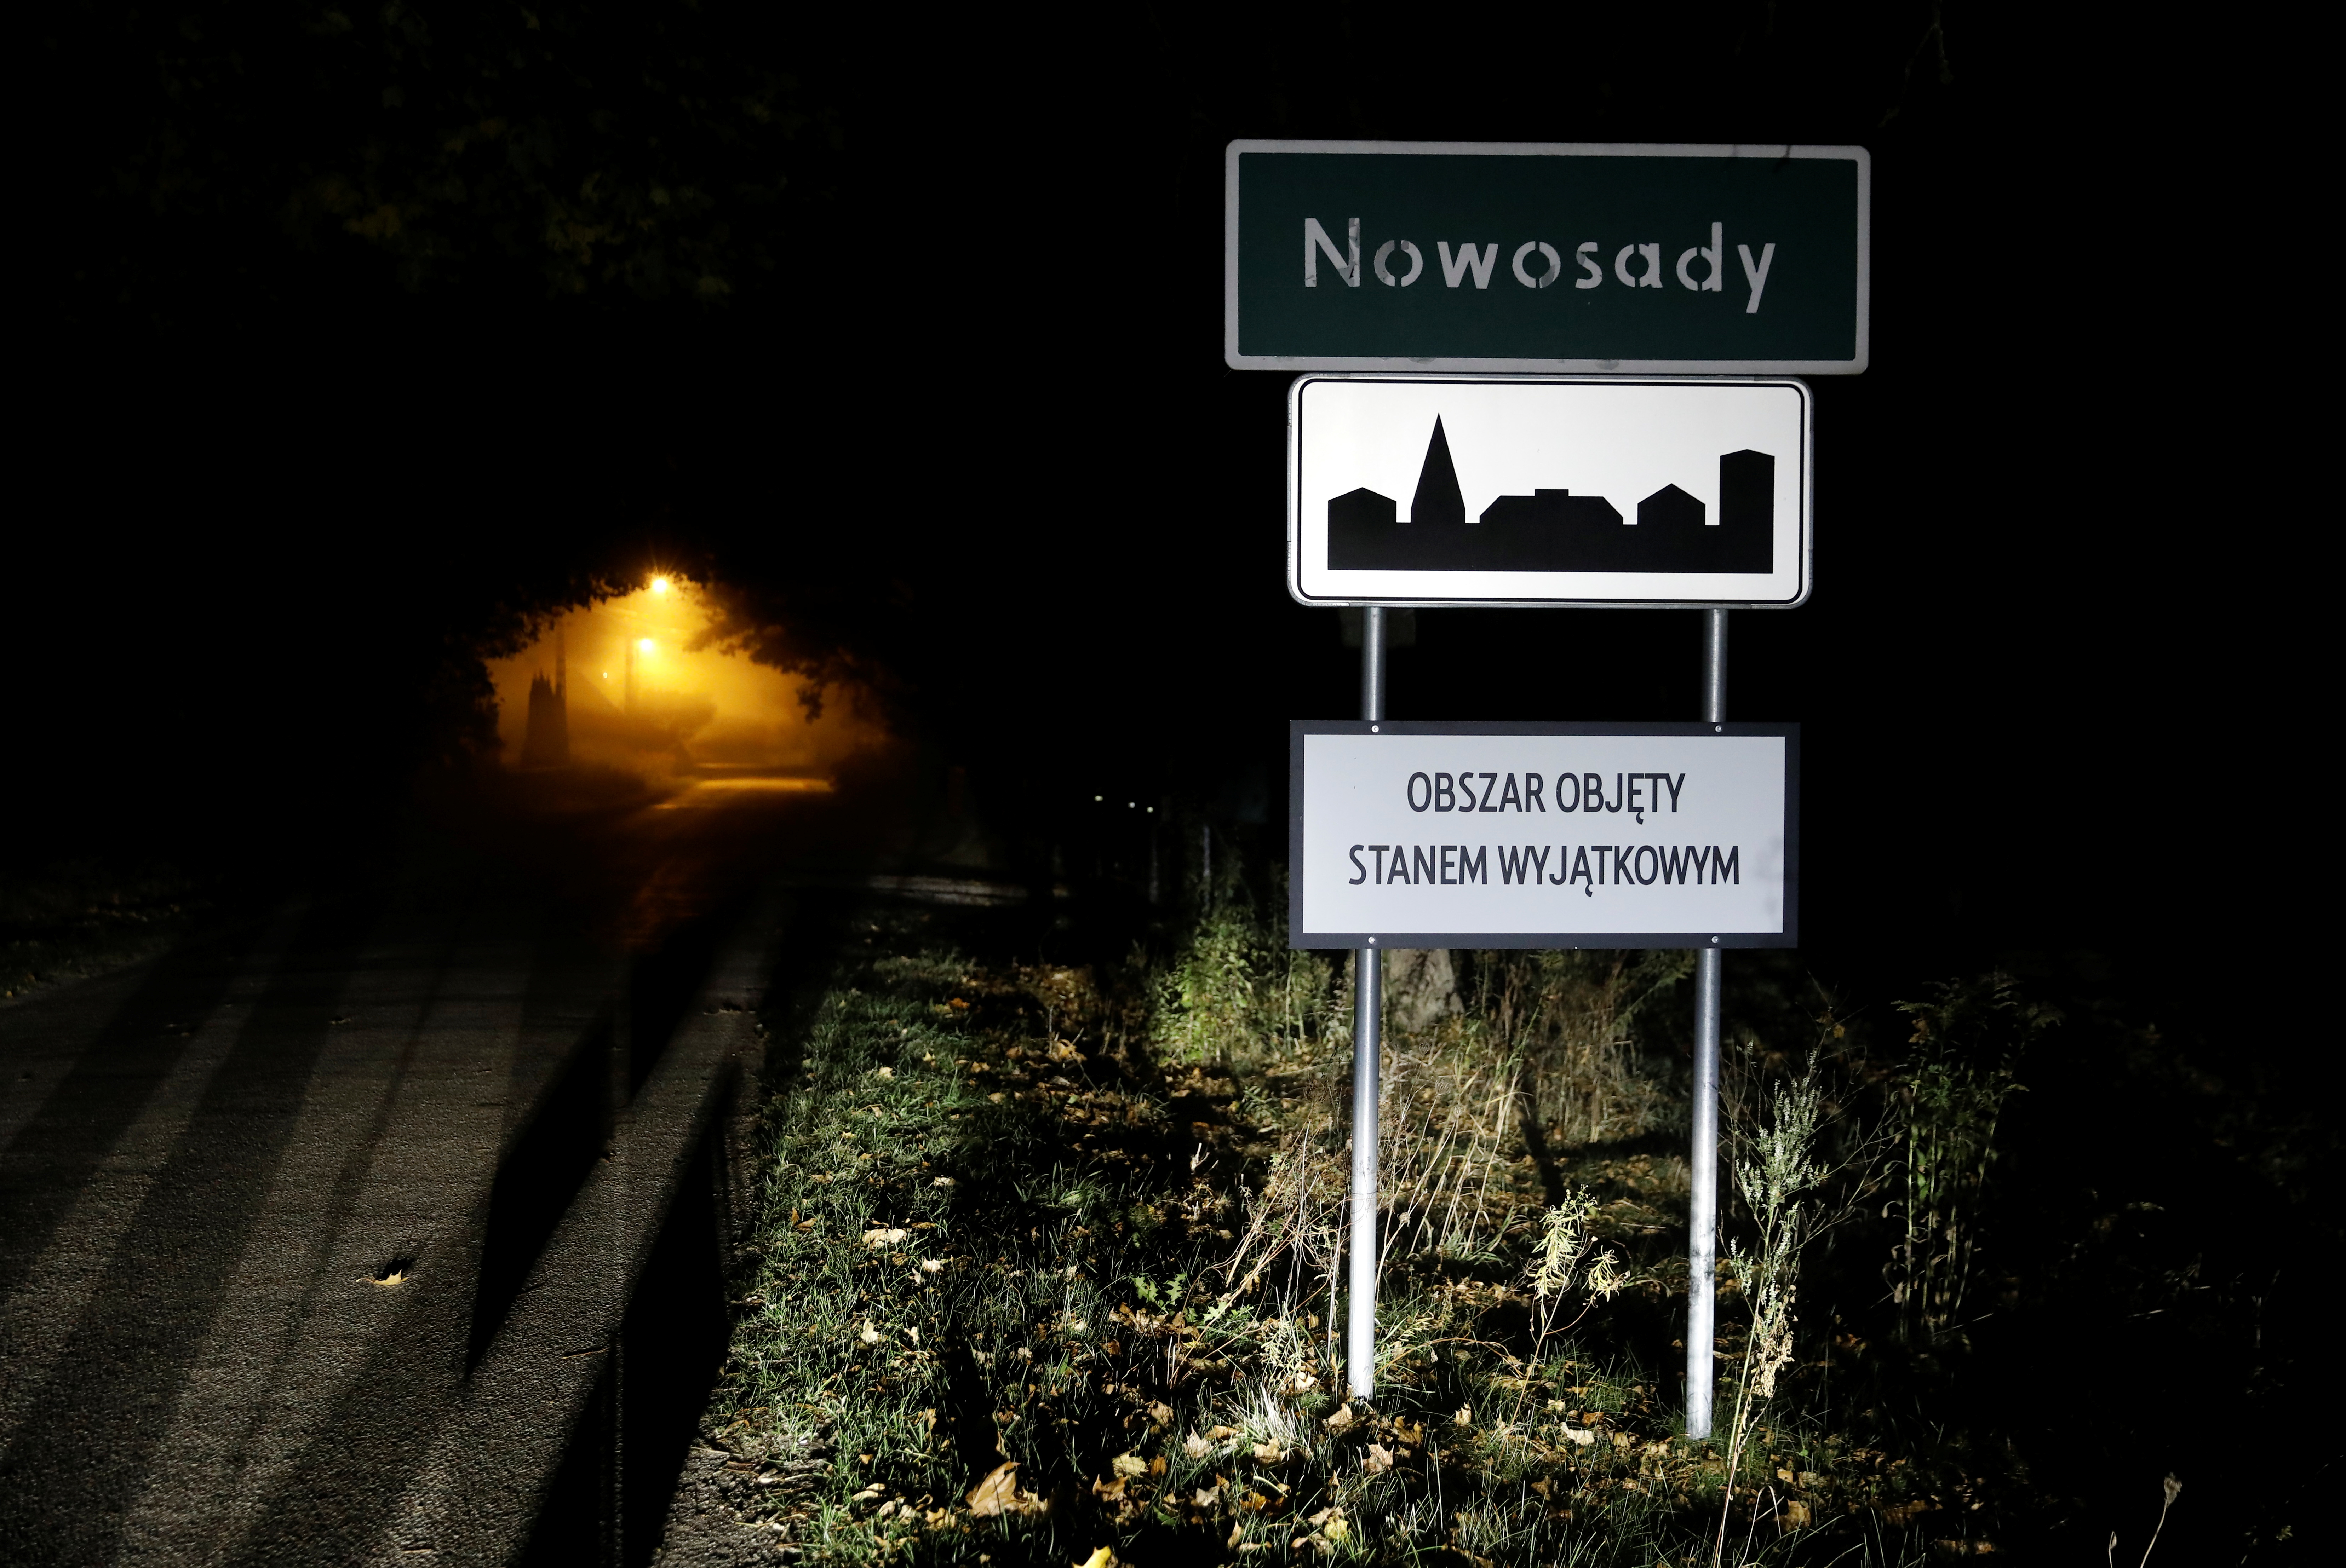 Road sign with 'Area covered by a state of emergency' is seen near Belarusian-Polish border in Nowosady, Poland October 12, 2021. Picture taken October 12, 2021. REUTERS/Kacper Pempel